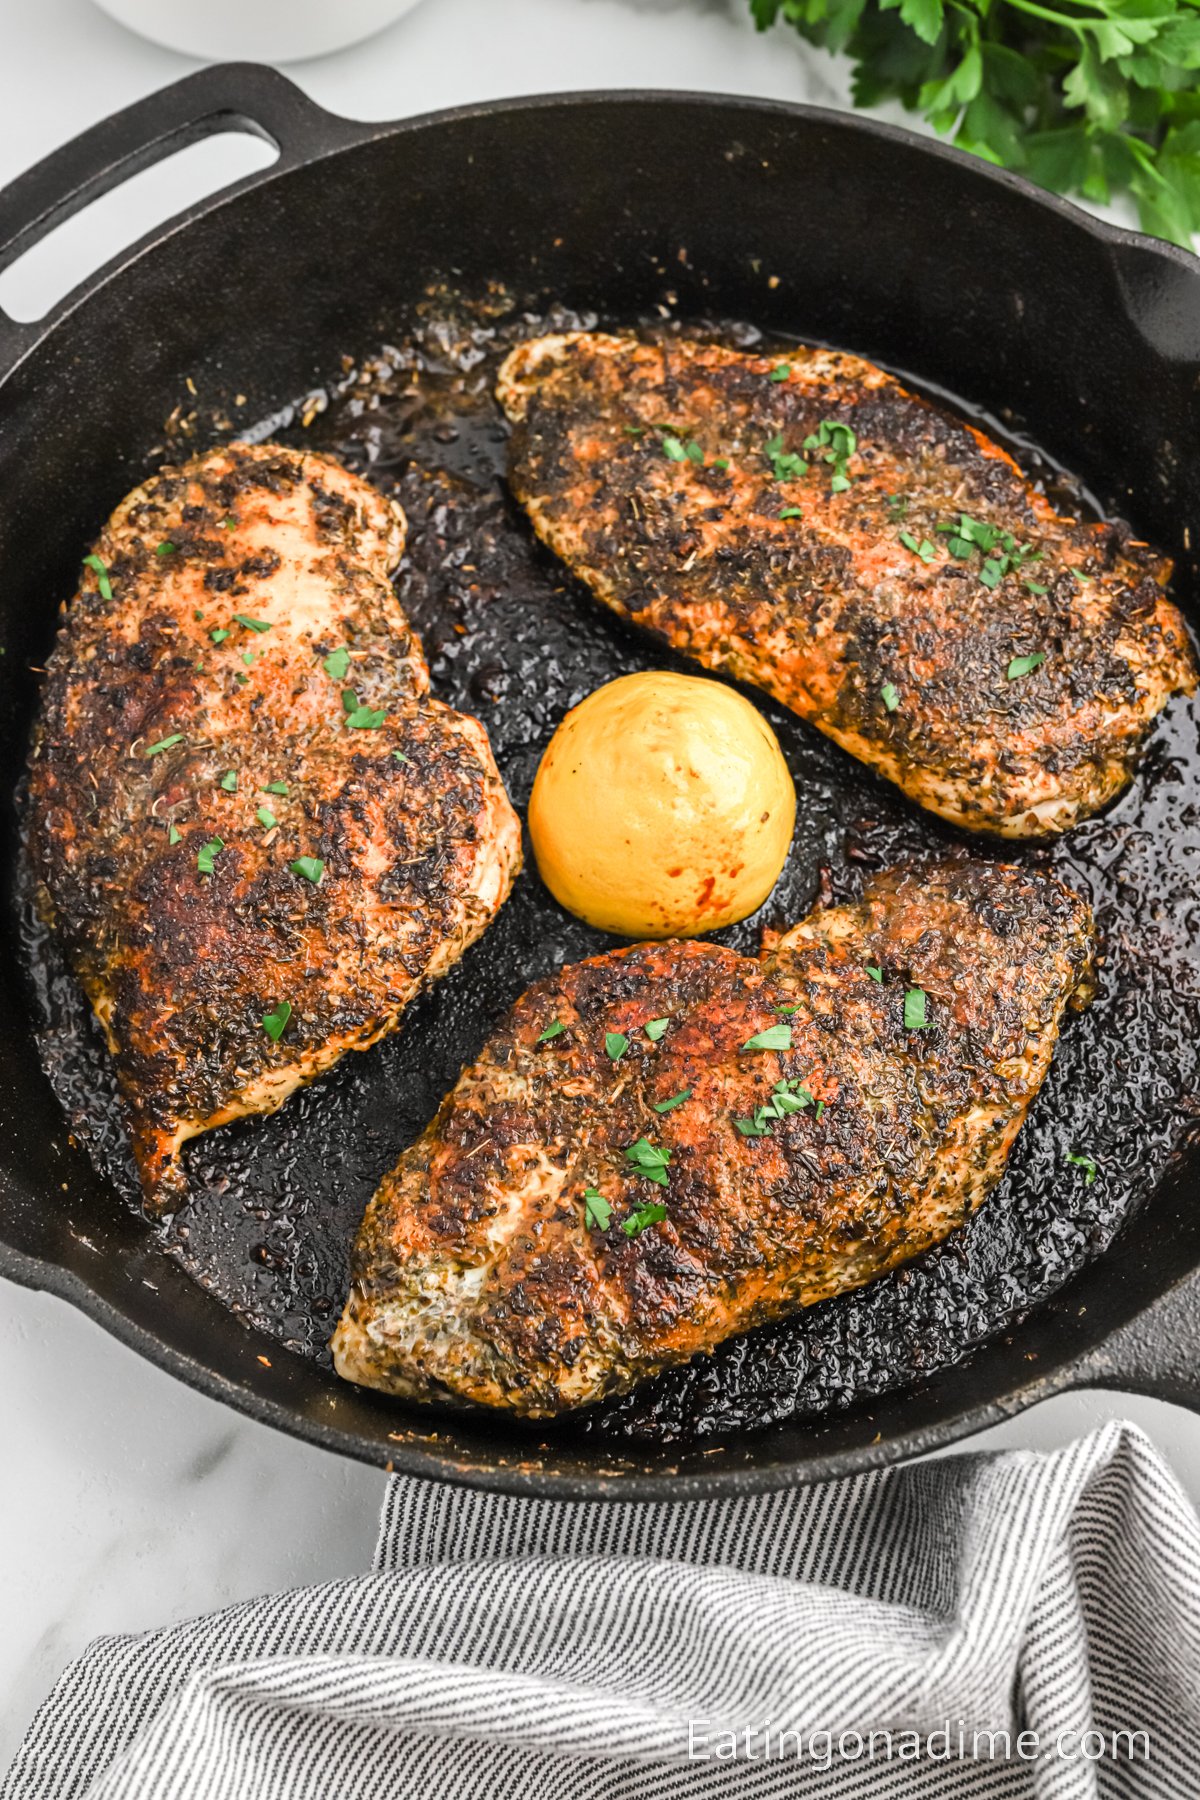 Herb crusted chicken in a cast iron skillet